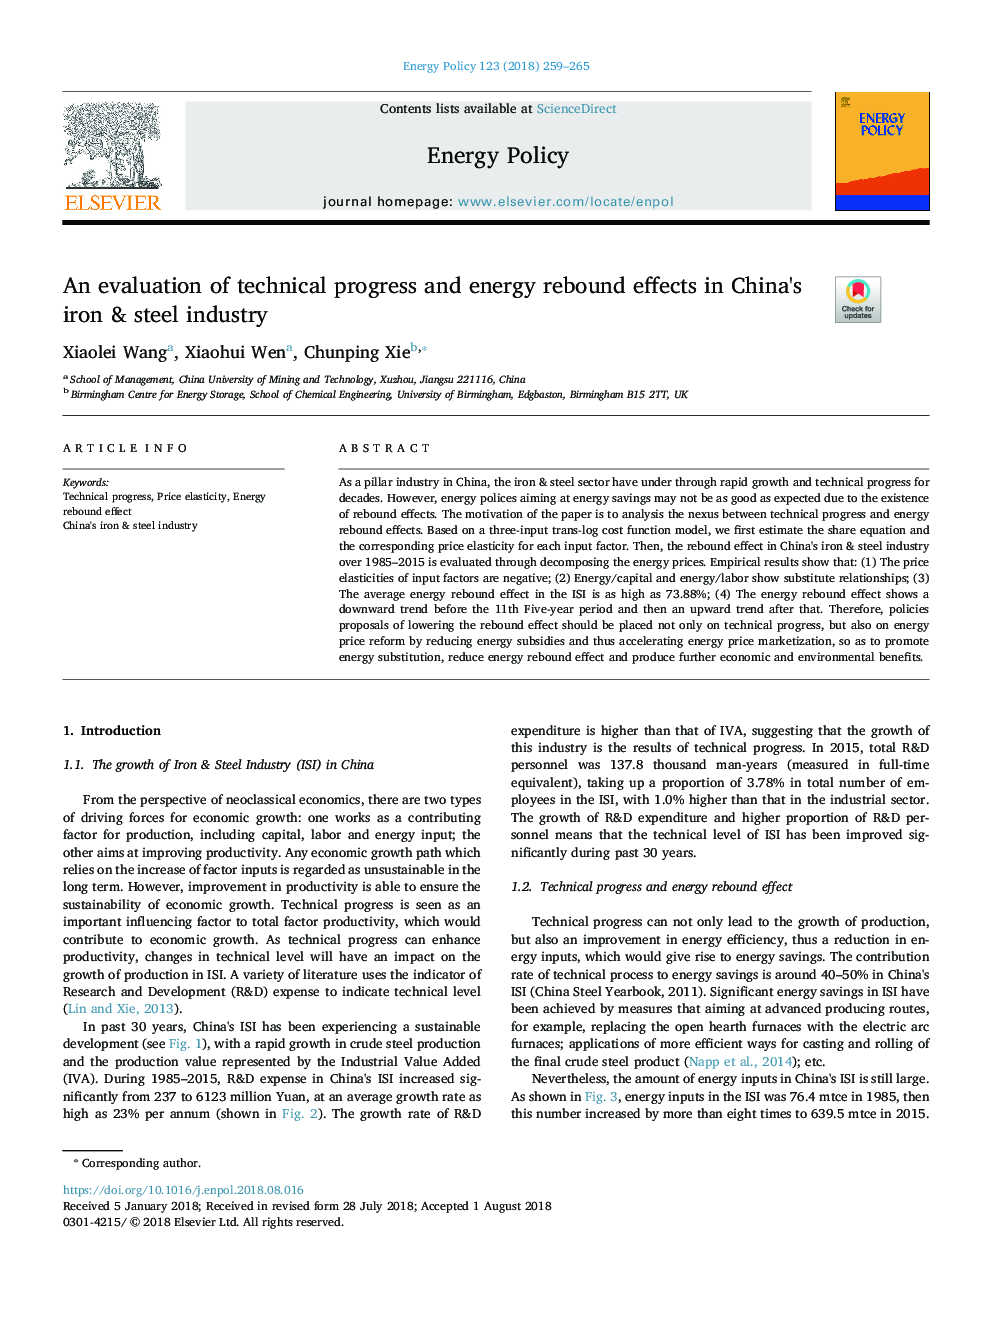 An evaluation of technical progress and energy rebound effects in China's iron & steel industry